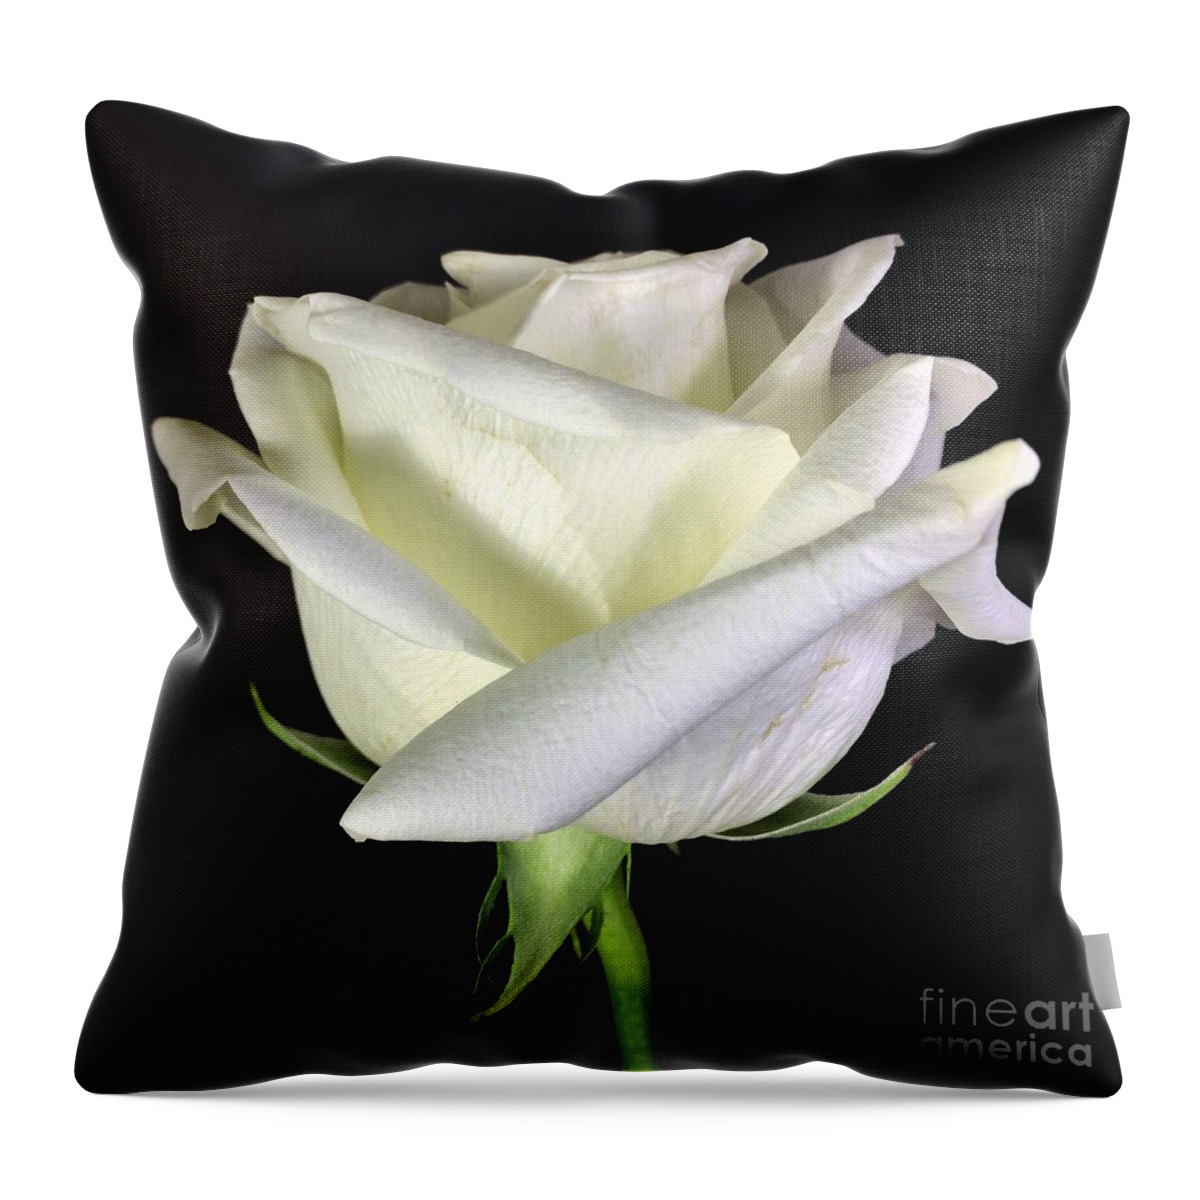 Photograph Throw Pillow featuring the photograph Photograph White Rose by Delynn Addams by Delynn Addams